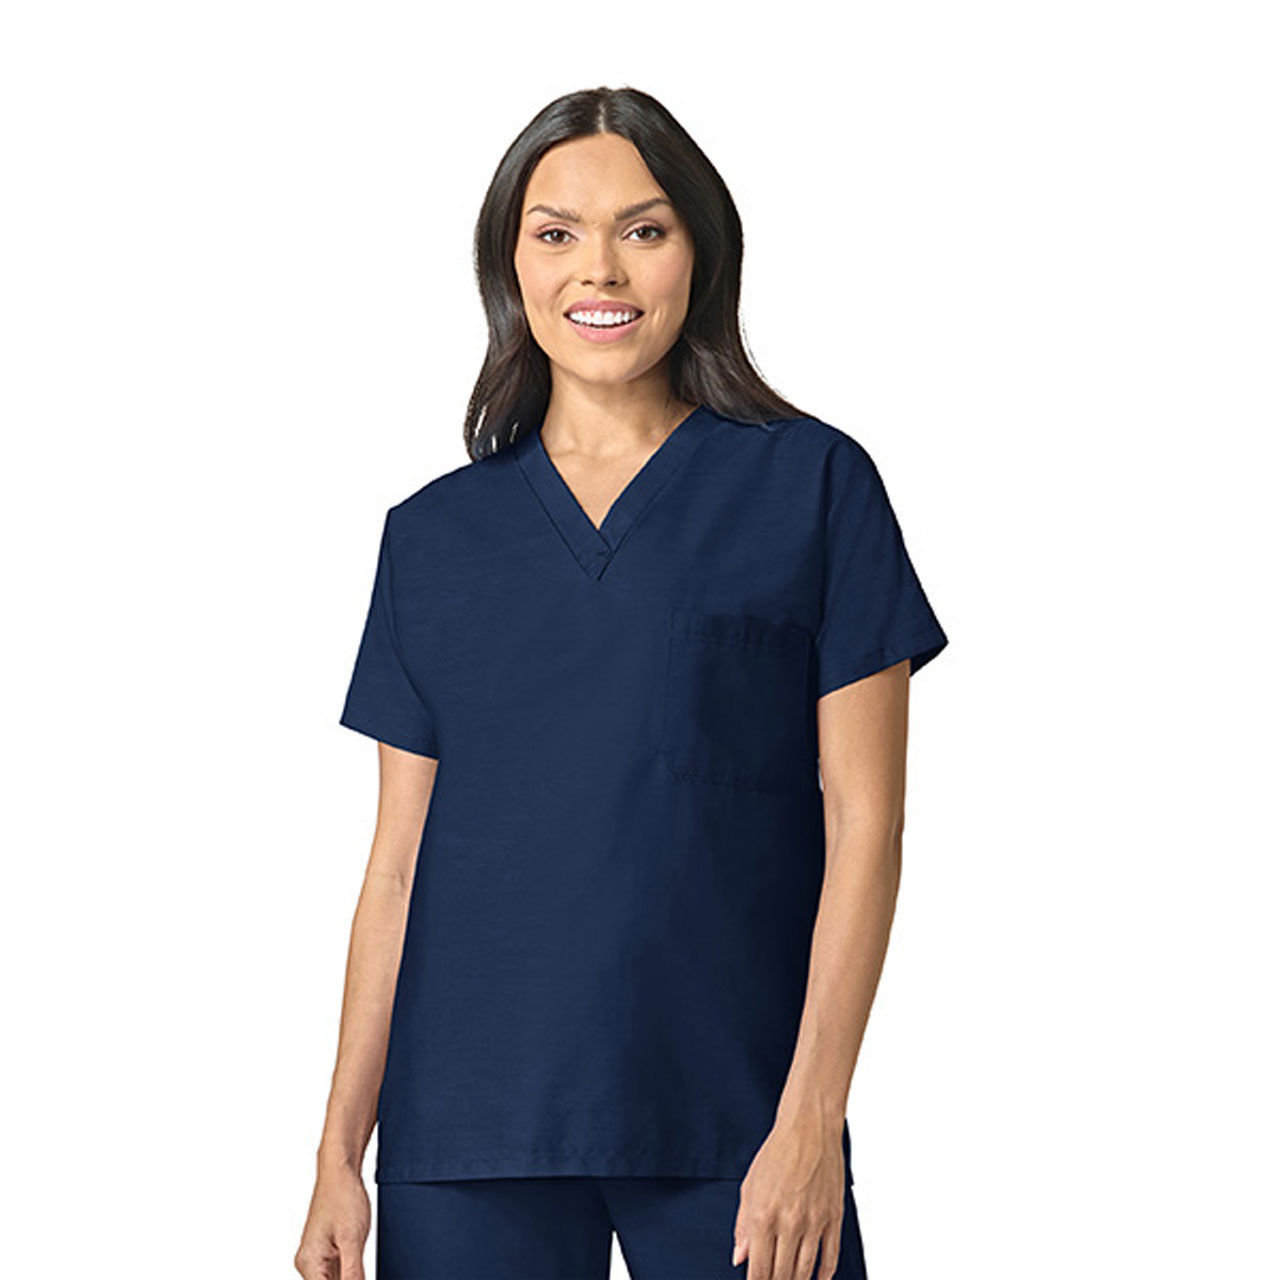 Is the V Neck Scrub Top comfortable?